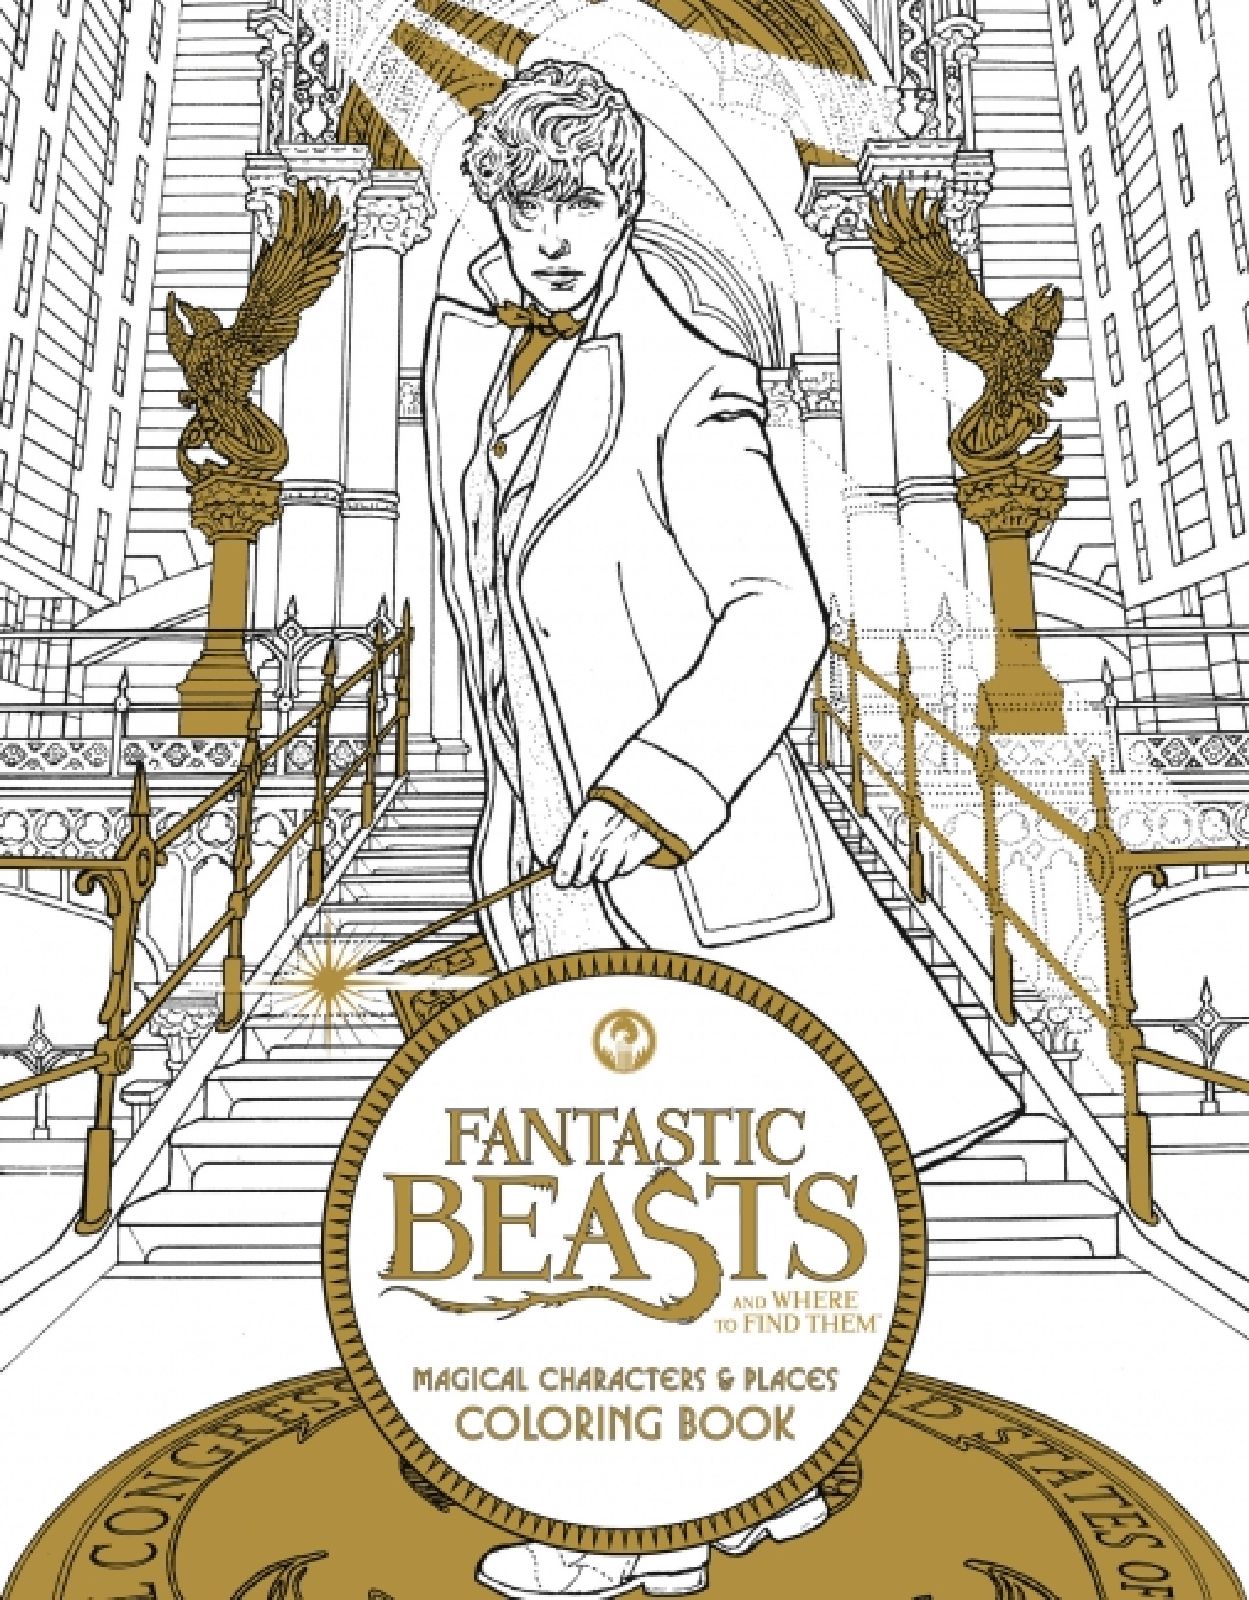 Fantastic Beasts and Where to Find Them Magical Character & Places Coloring Book